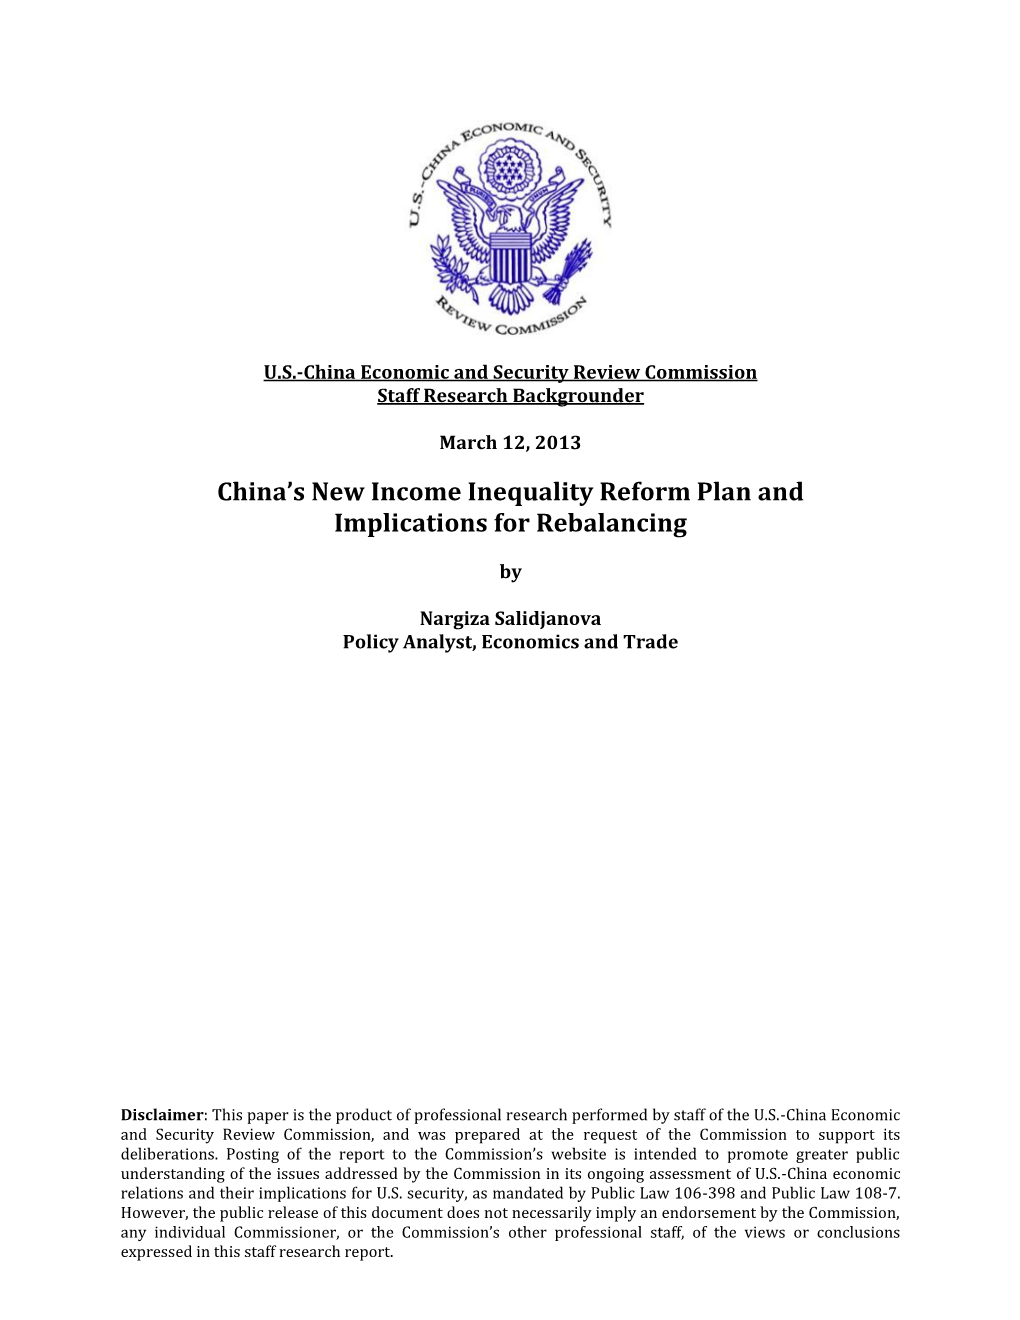 China's New Income Inequality Reform Plan and Implications For